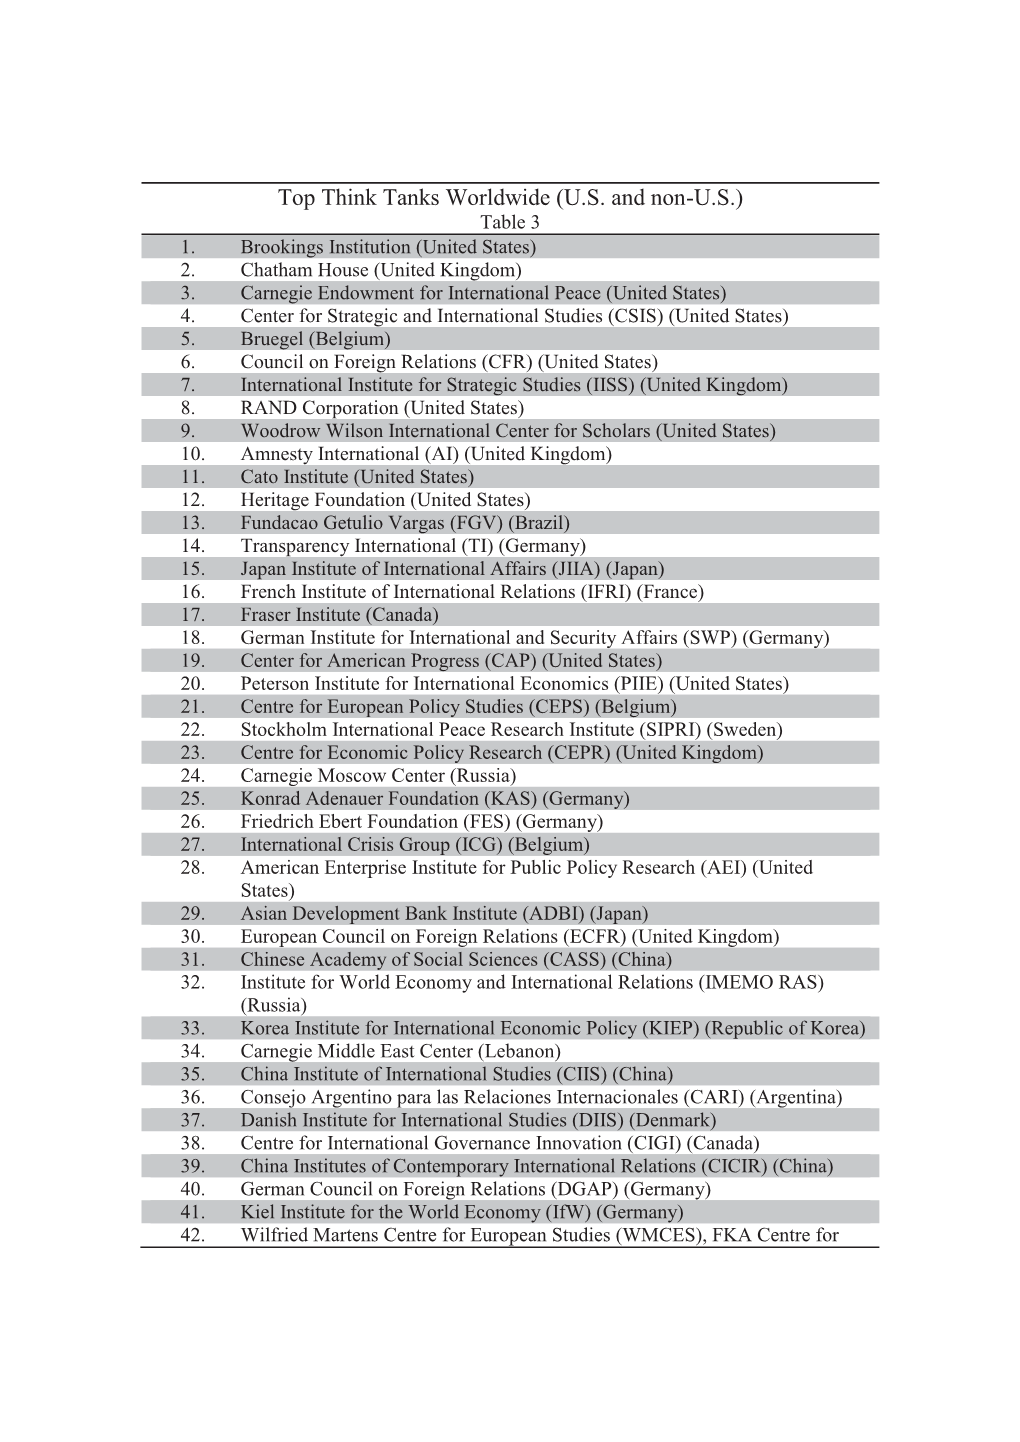 Top Think Tanks Worldwide (U.S. and Non-U.S.) Table 3 1